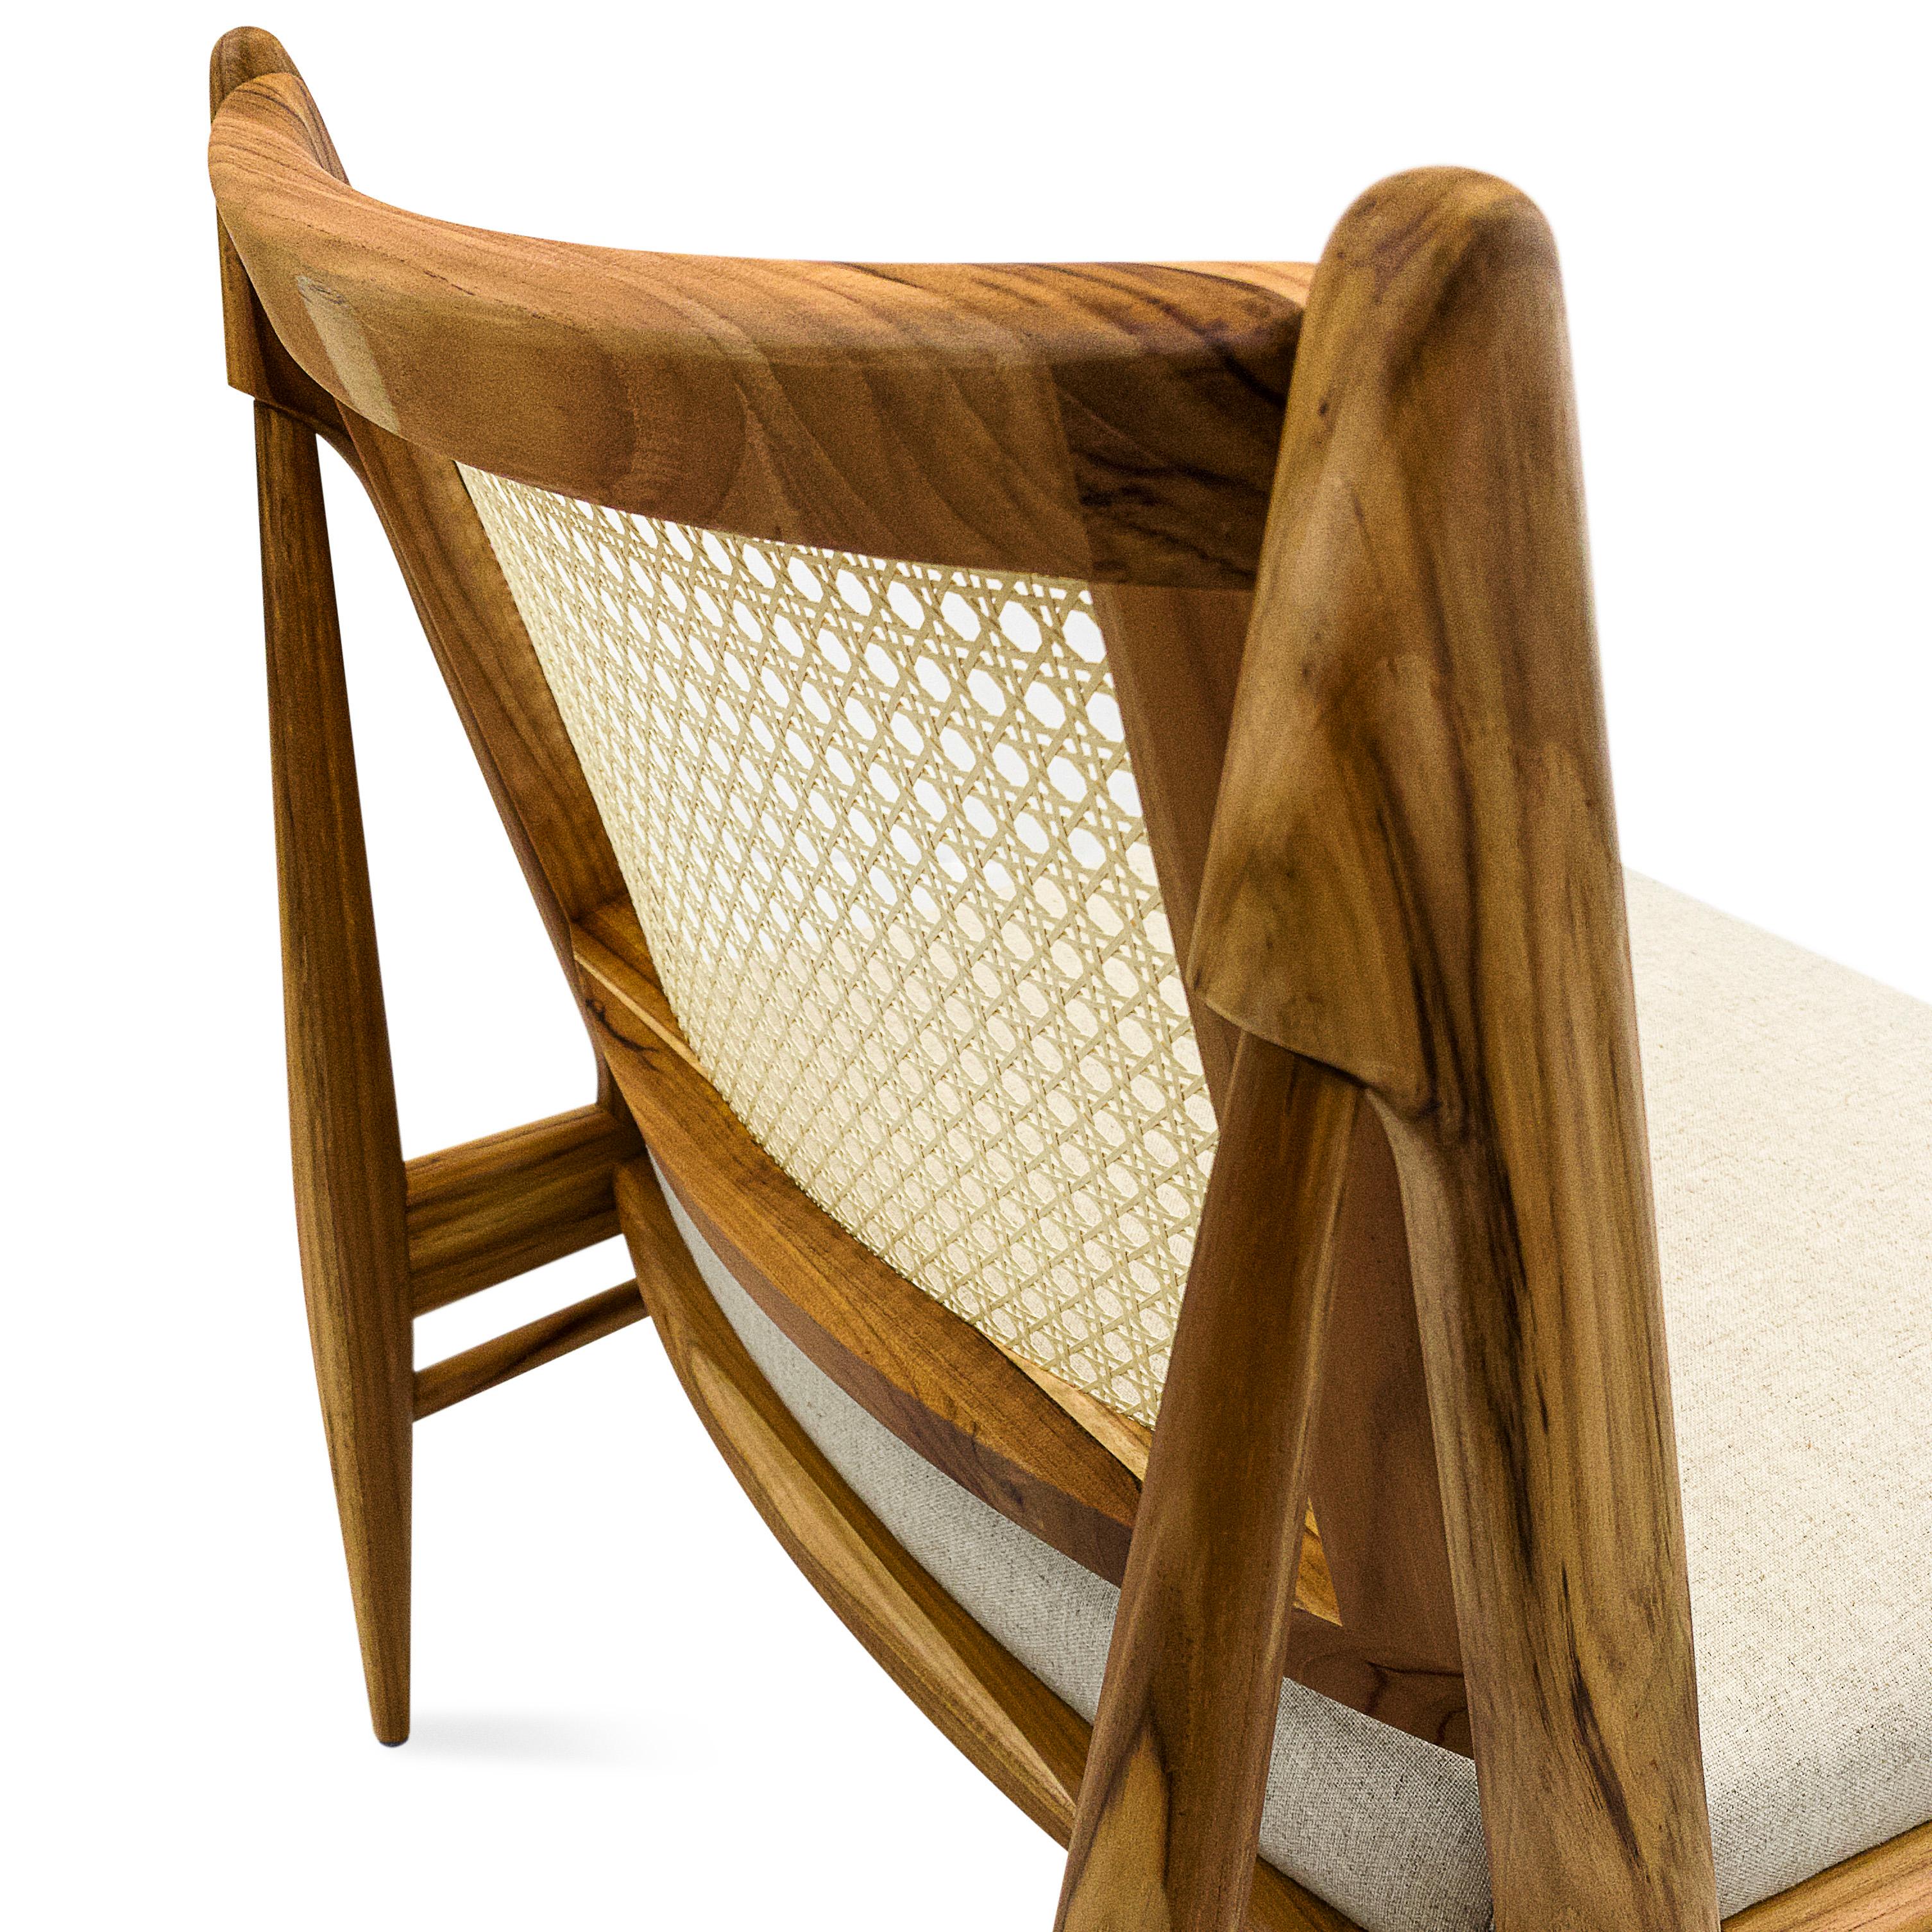 Contemporary Donna Cane-Back Chair in Teak Wood Finish with Oatmeal Fabric Seat For Sale